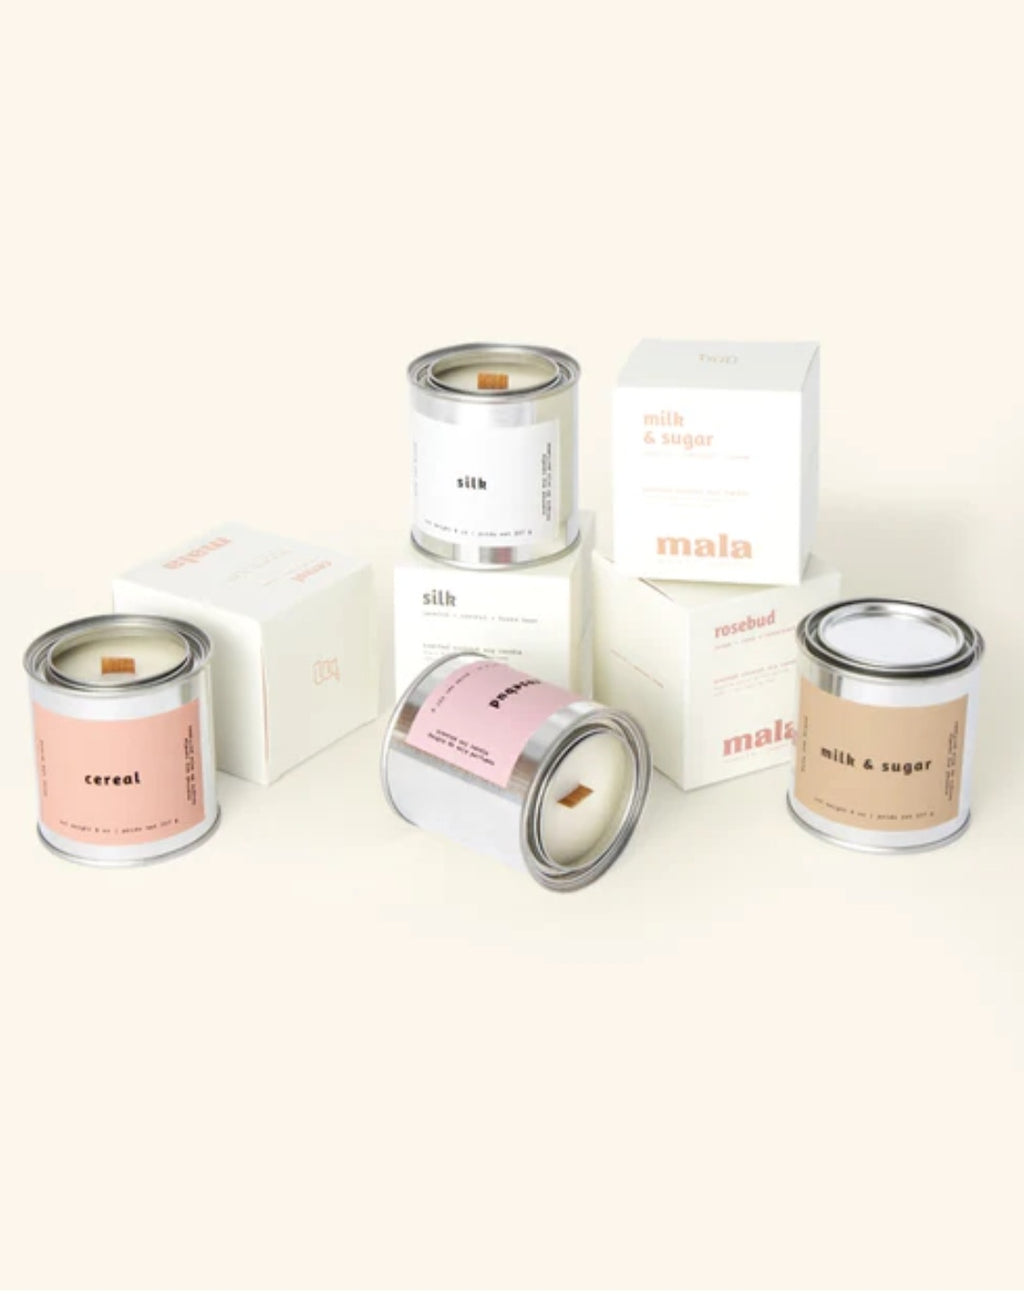 Candles by Mala The Brand SALE